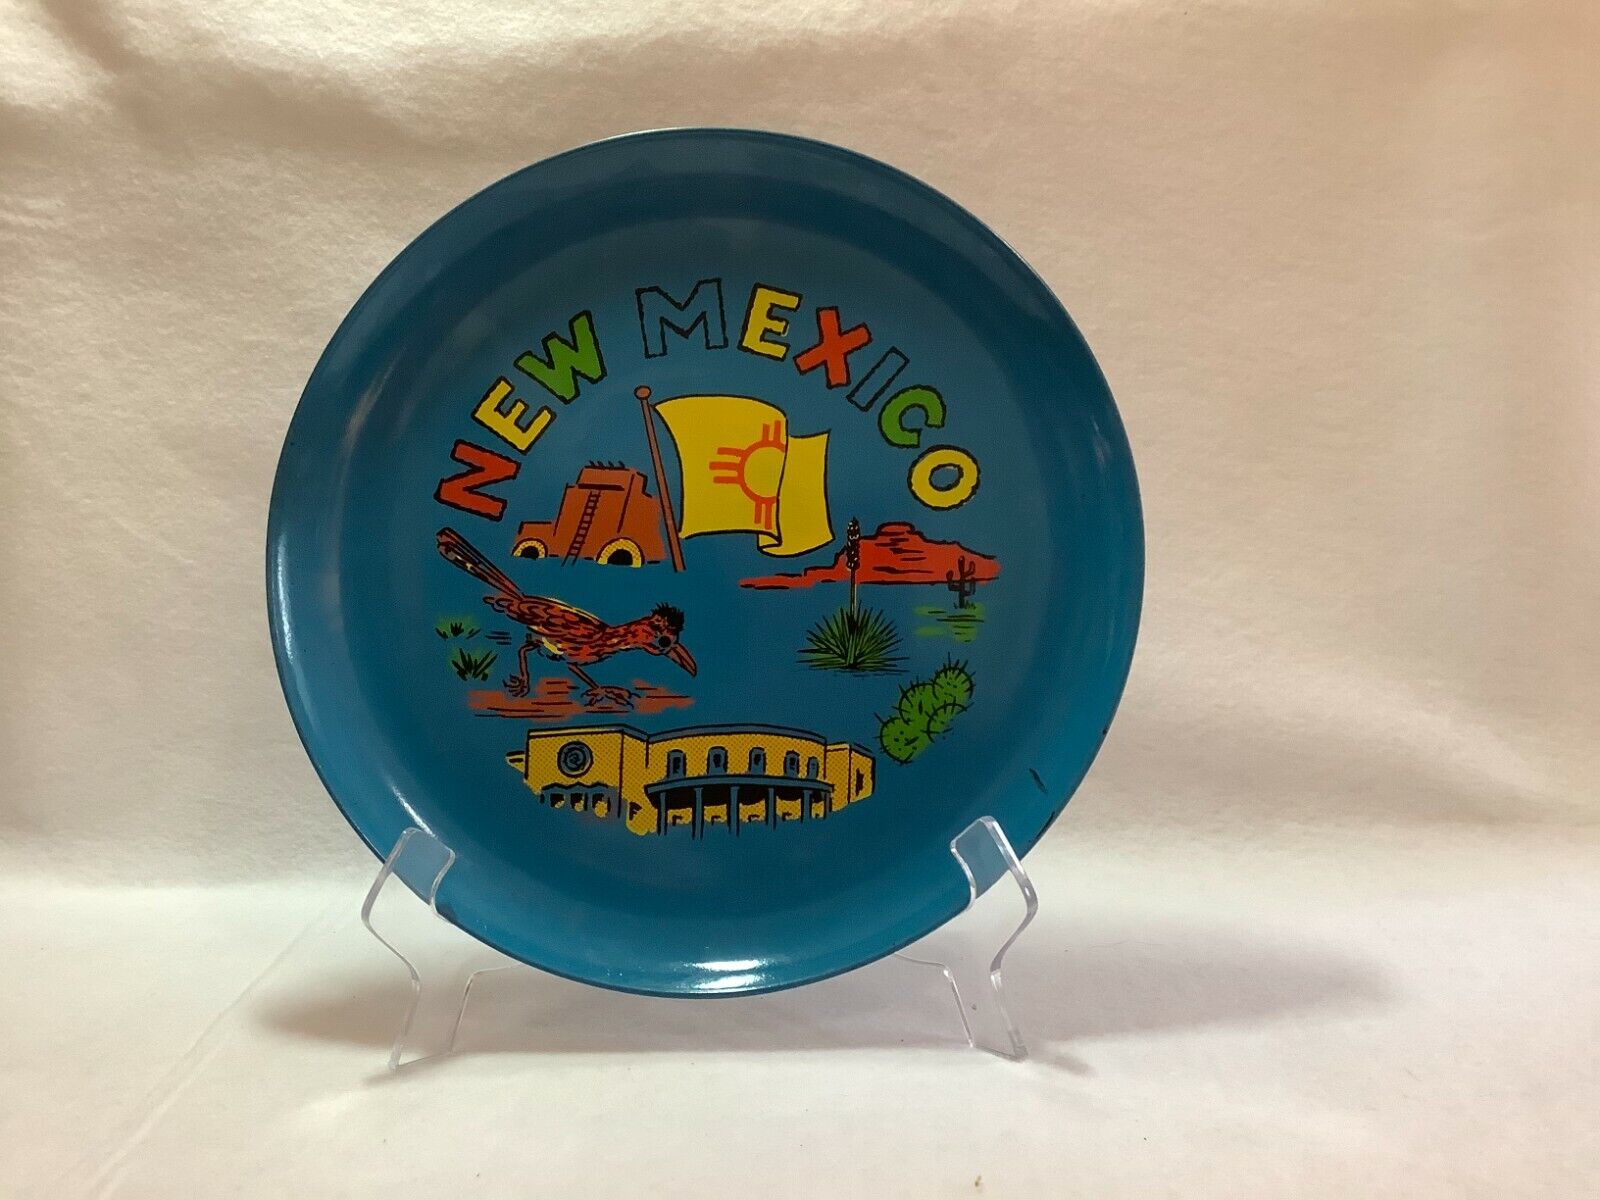 New Mexico Plastic Collectible Souvenir Tray or Large 10 inch Colorful Platter